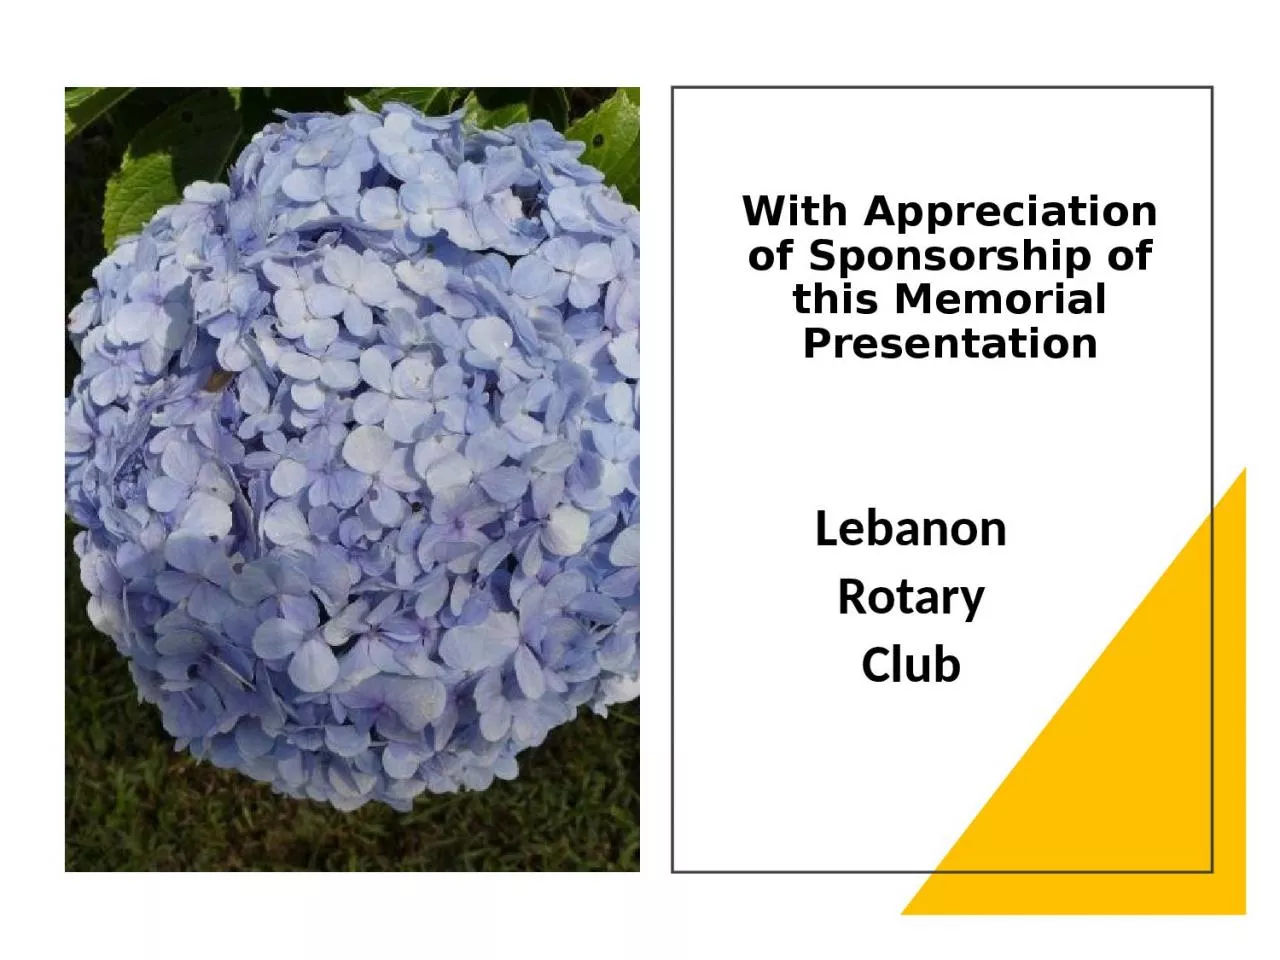 With Appreciation of Sponsorship of this Memorial Presentation